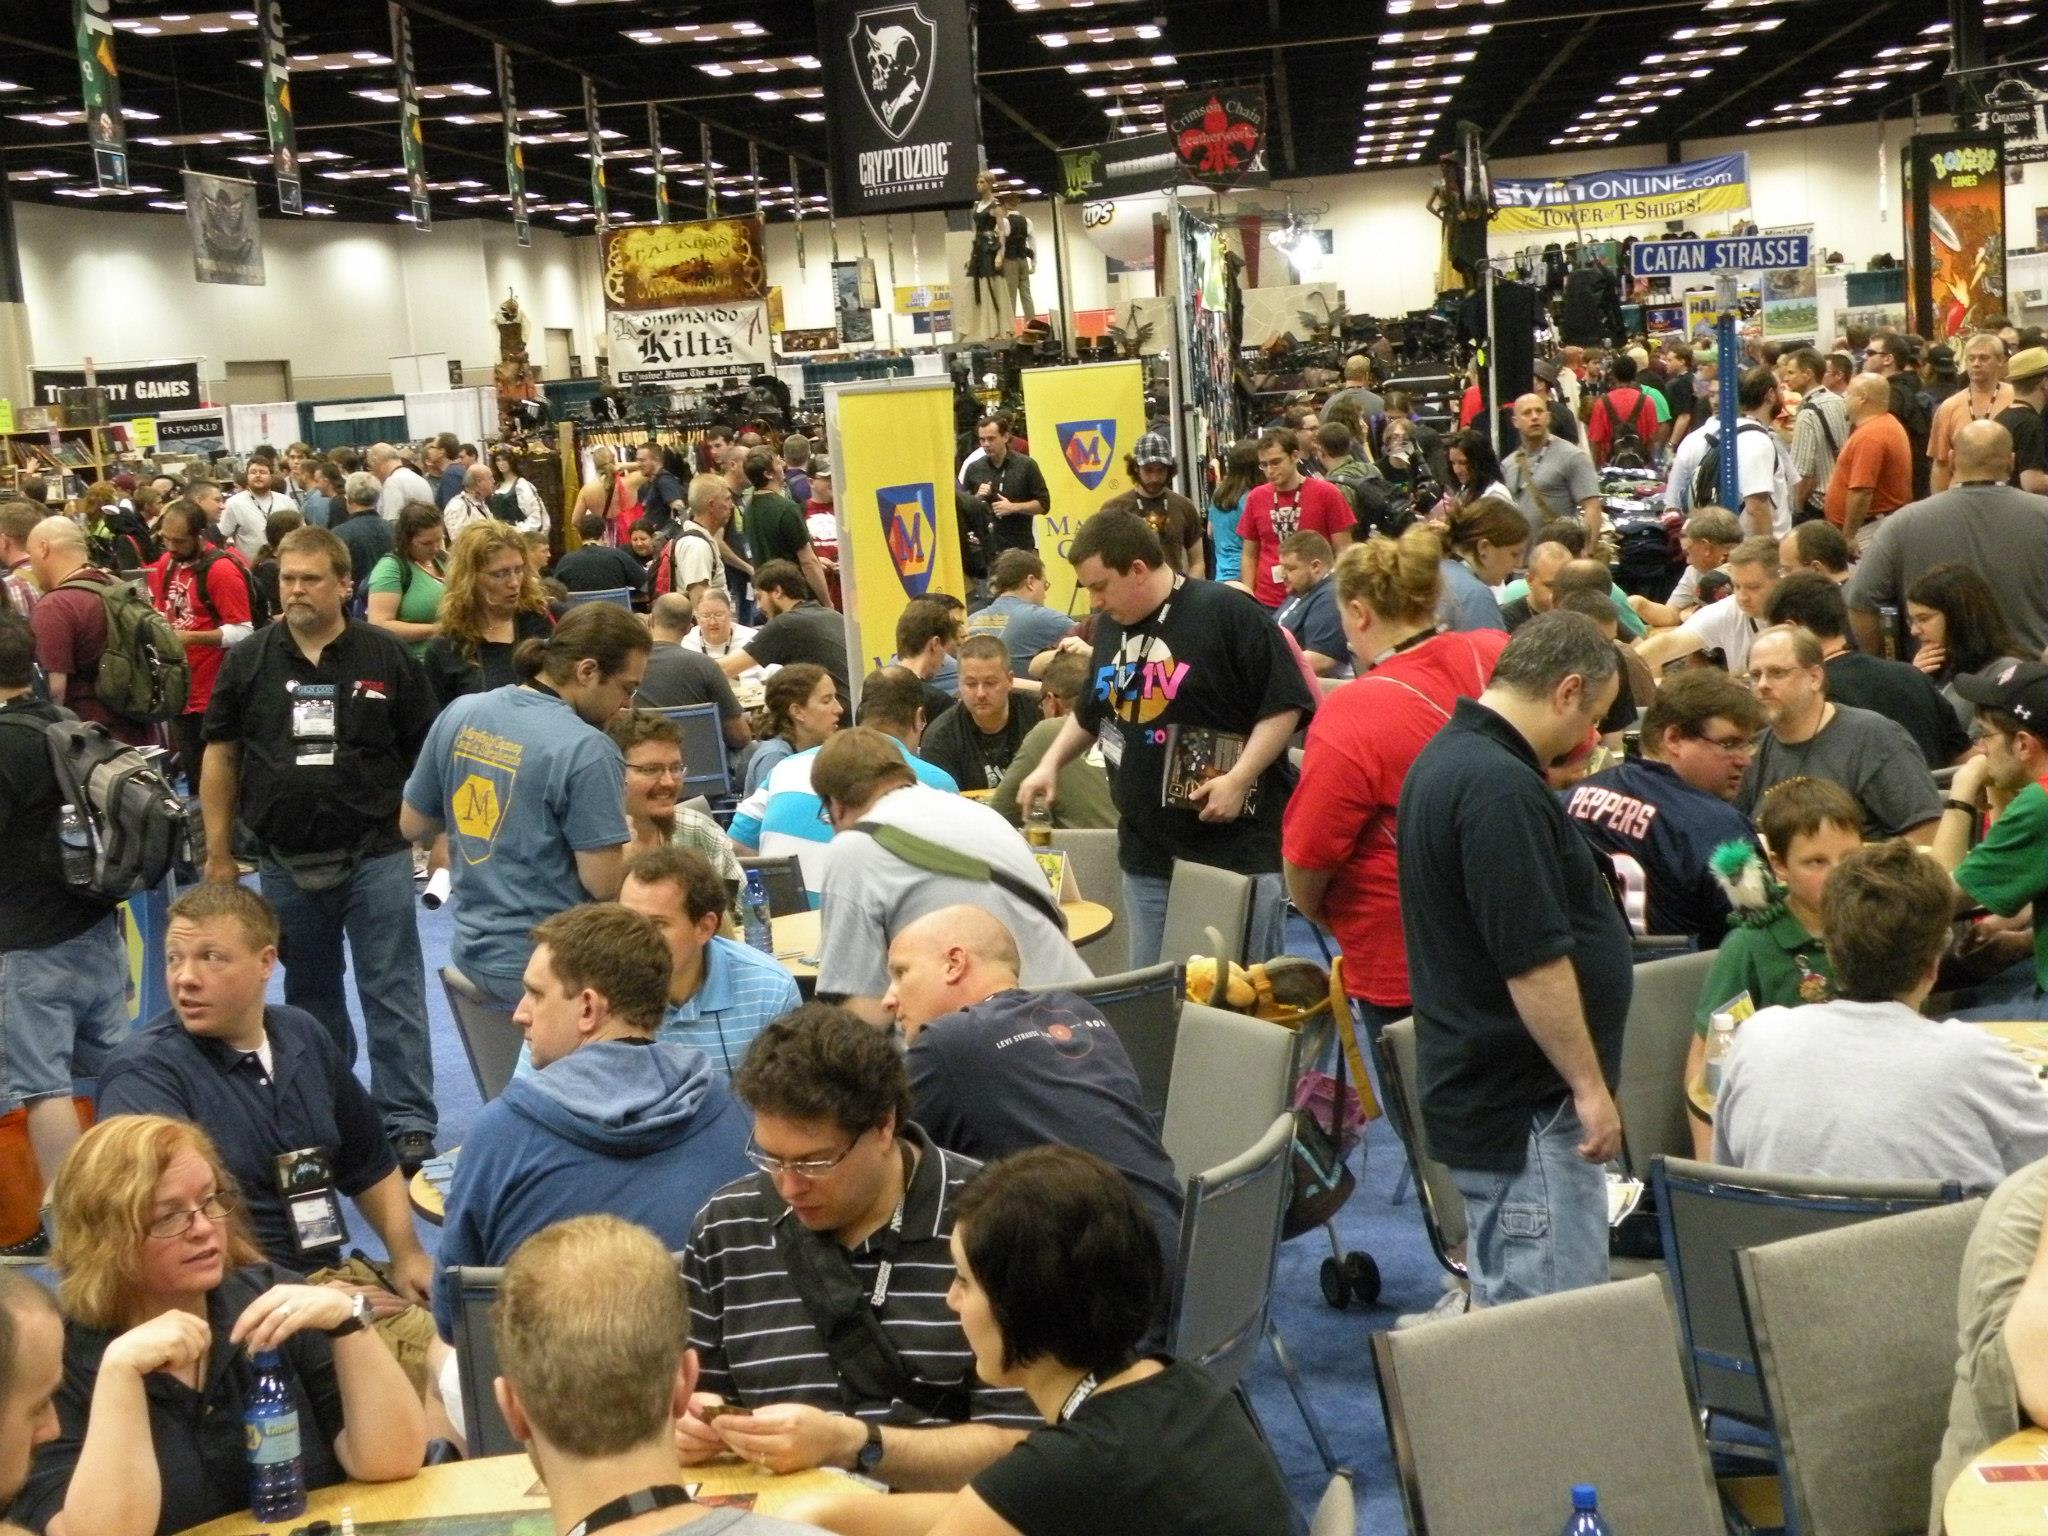 Geek insider, geekinsider, geekinsider. Com,, gen con and con*quest journals unite! , reviews